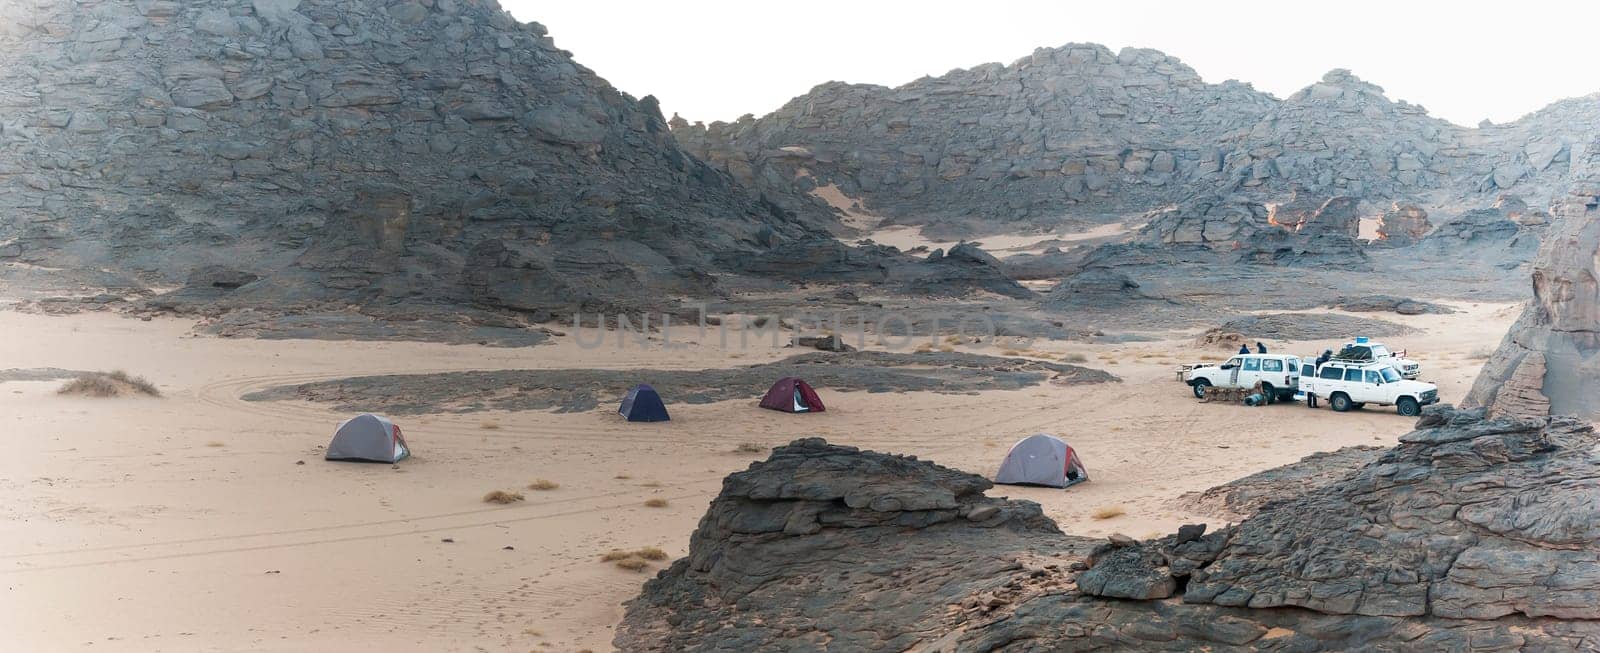 Camping in the Sahara by Giamplume